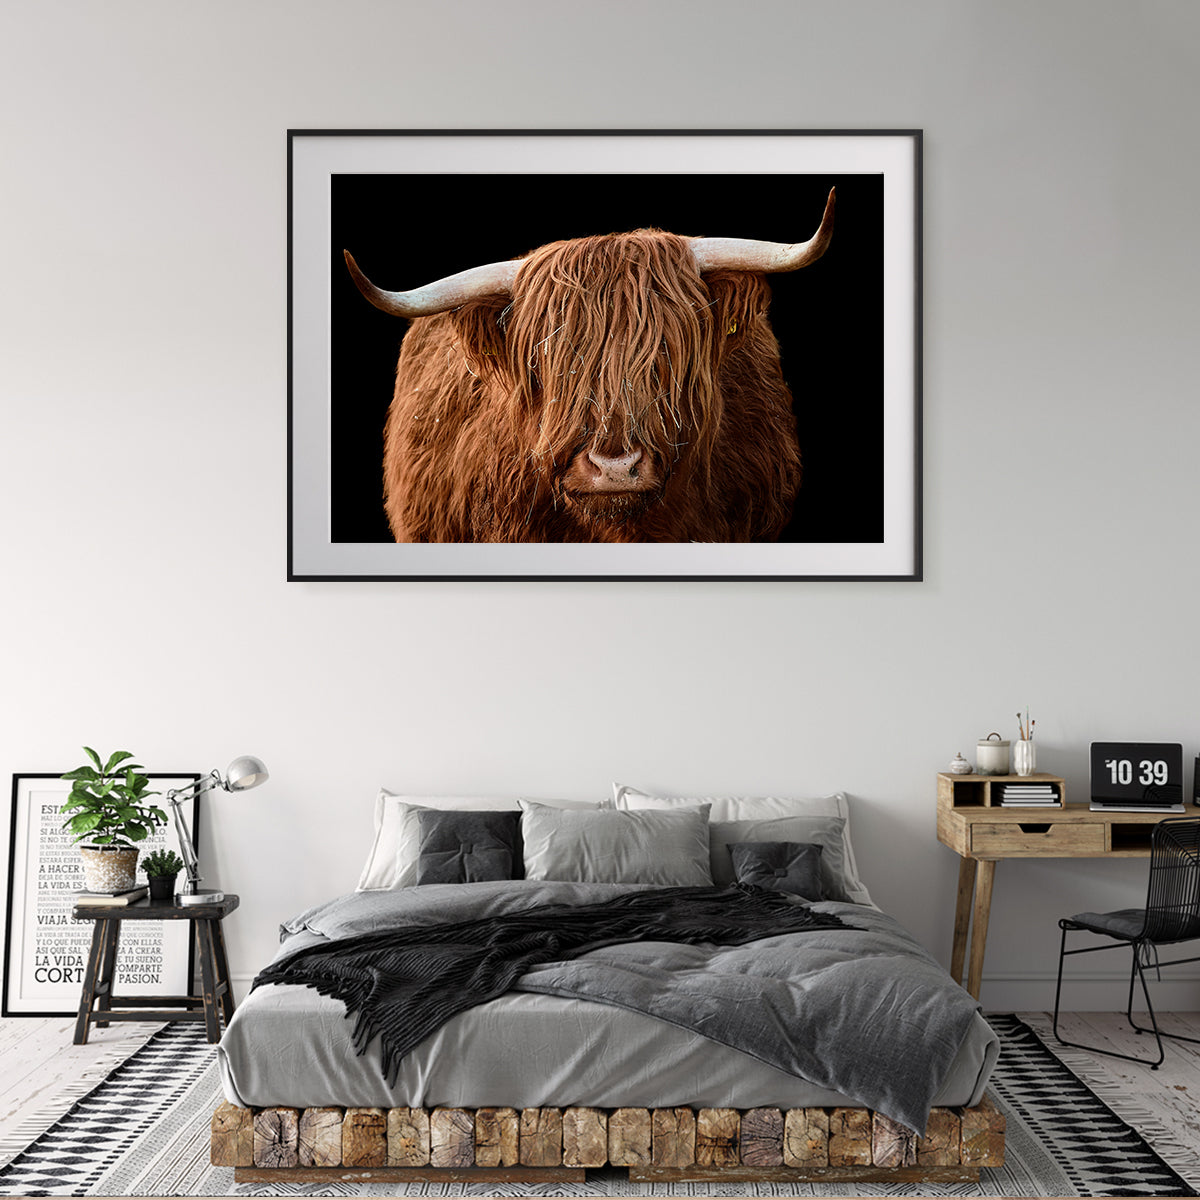 Lovely Highland Cow Portrait Posters For Living Room Wall-Horizontal Posters NOT FRAMED-CetArt-10″x8″ inches-CetArt